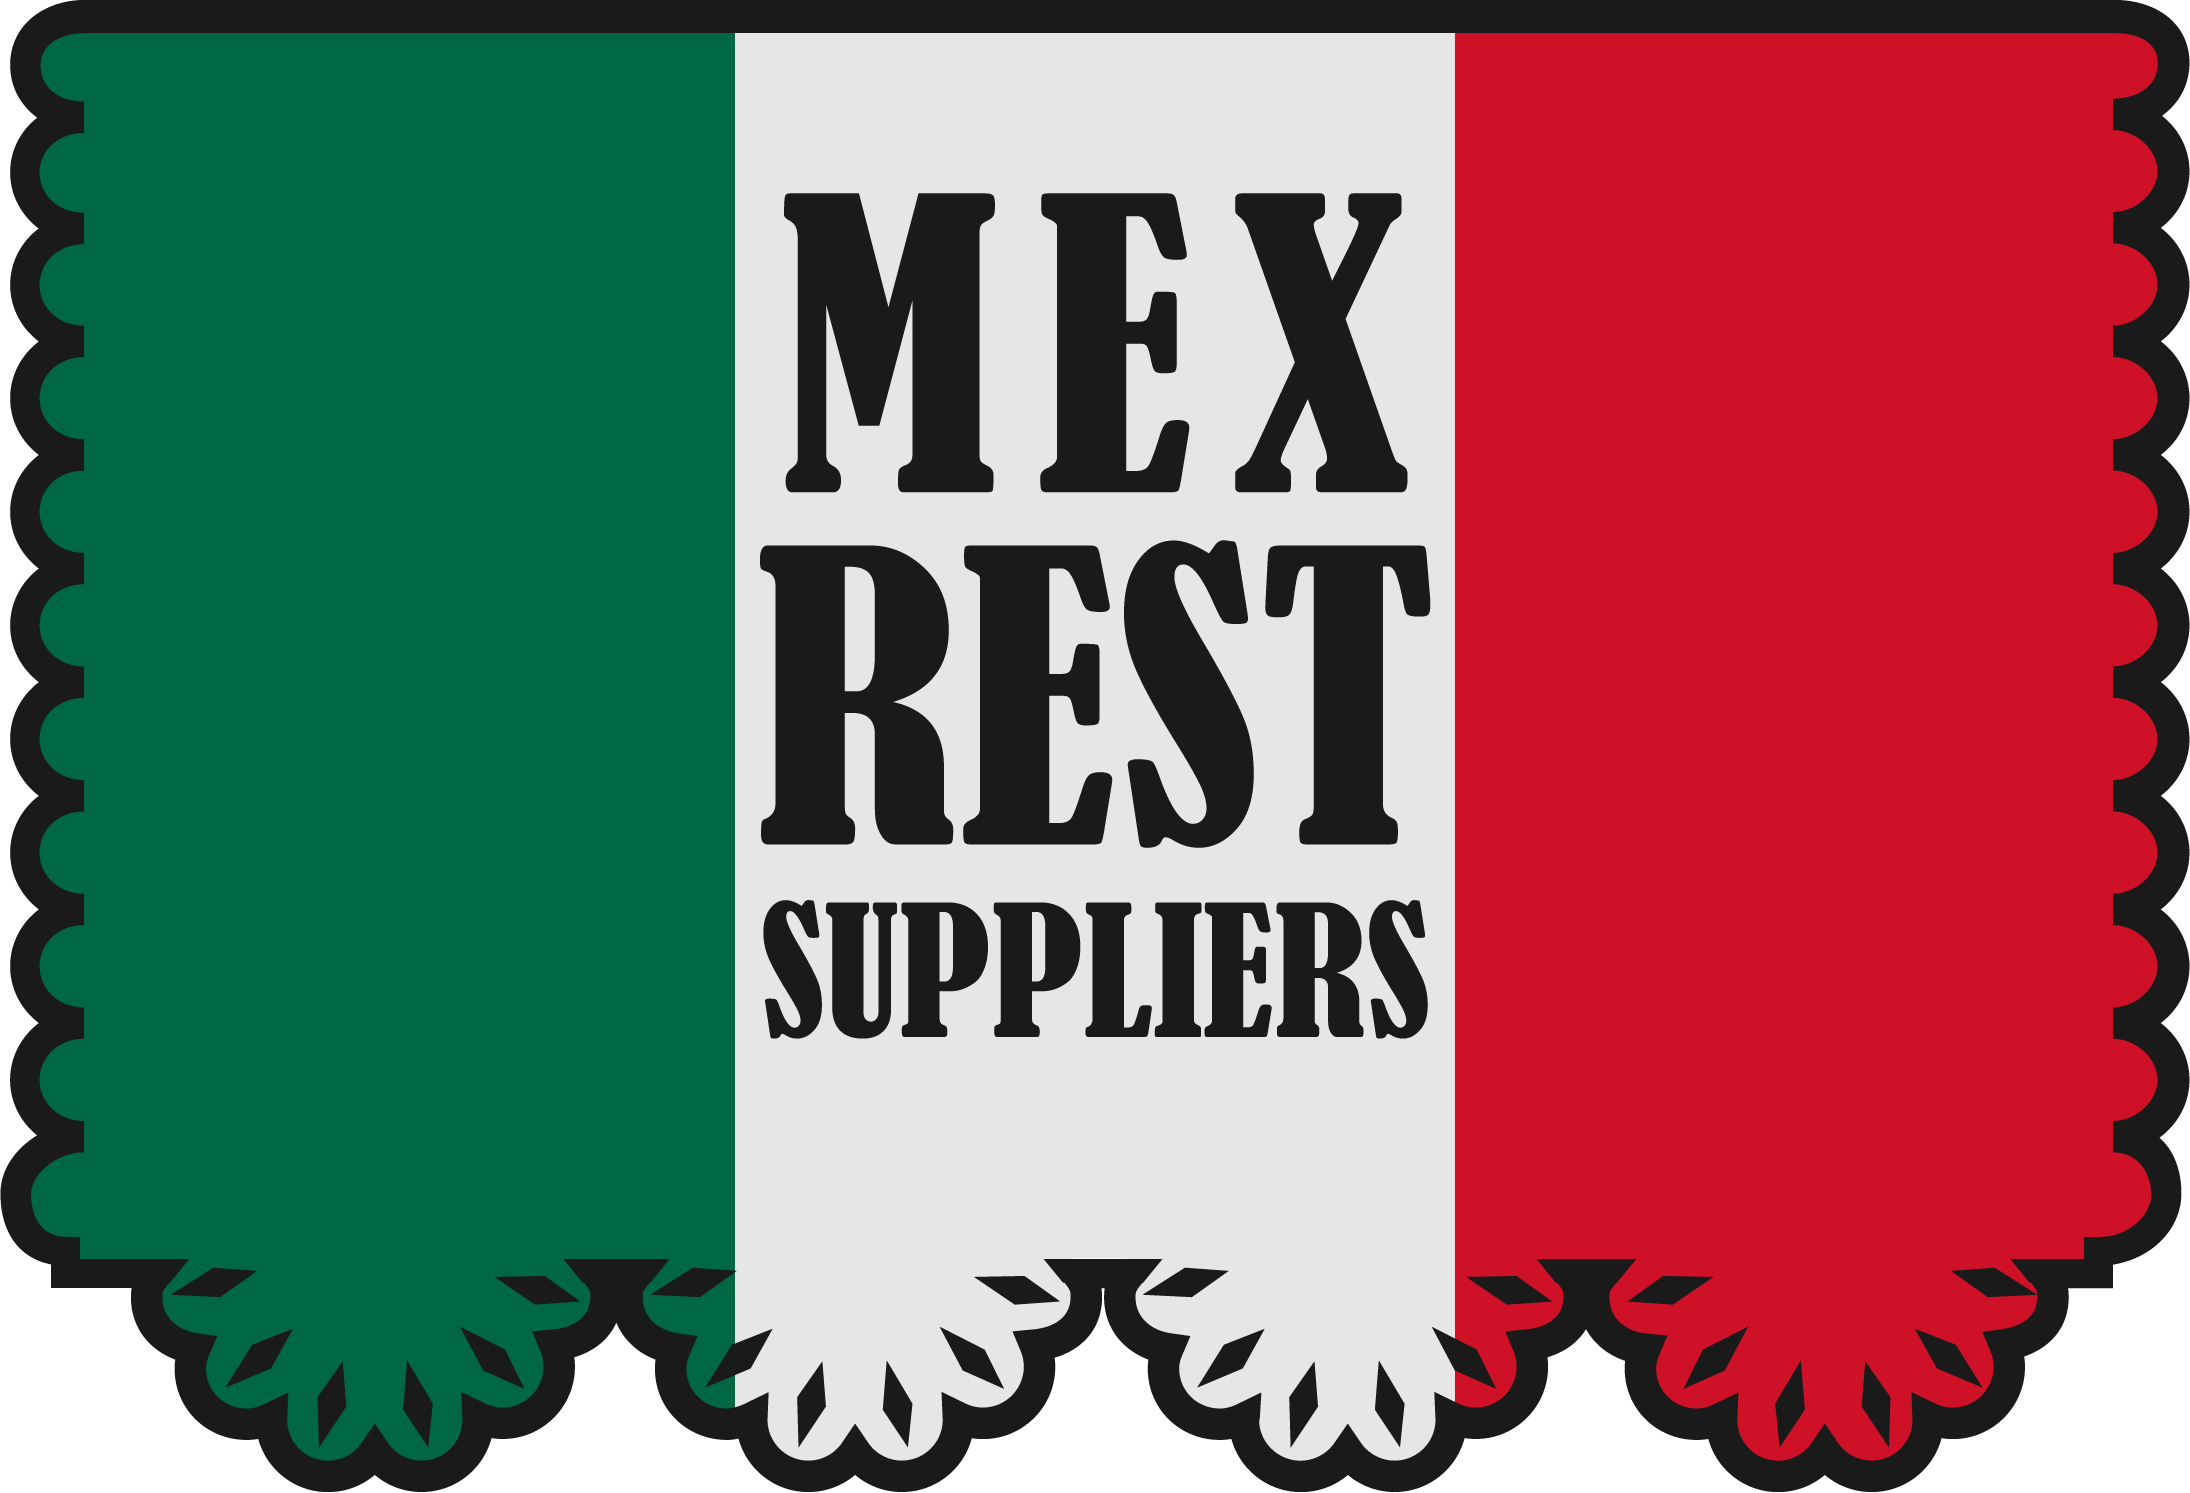 Mexican Restaurant Suppliers